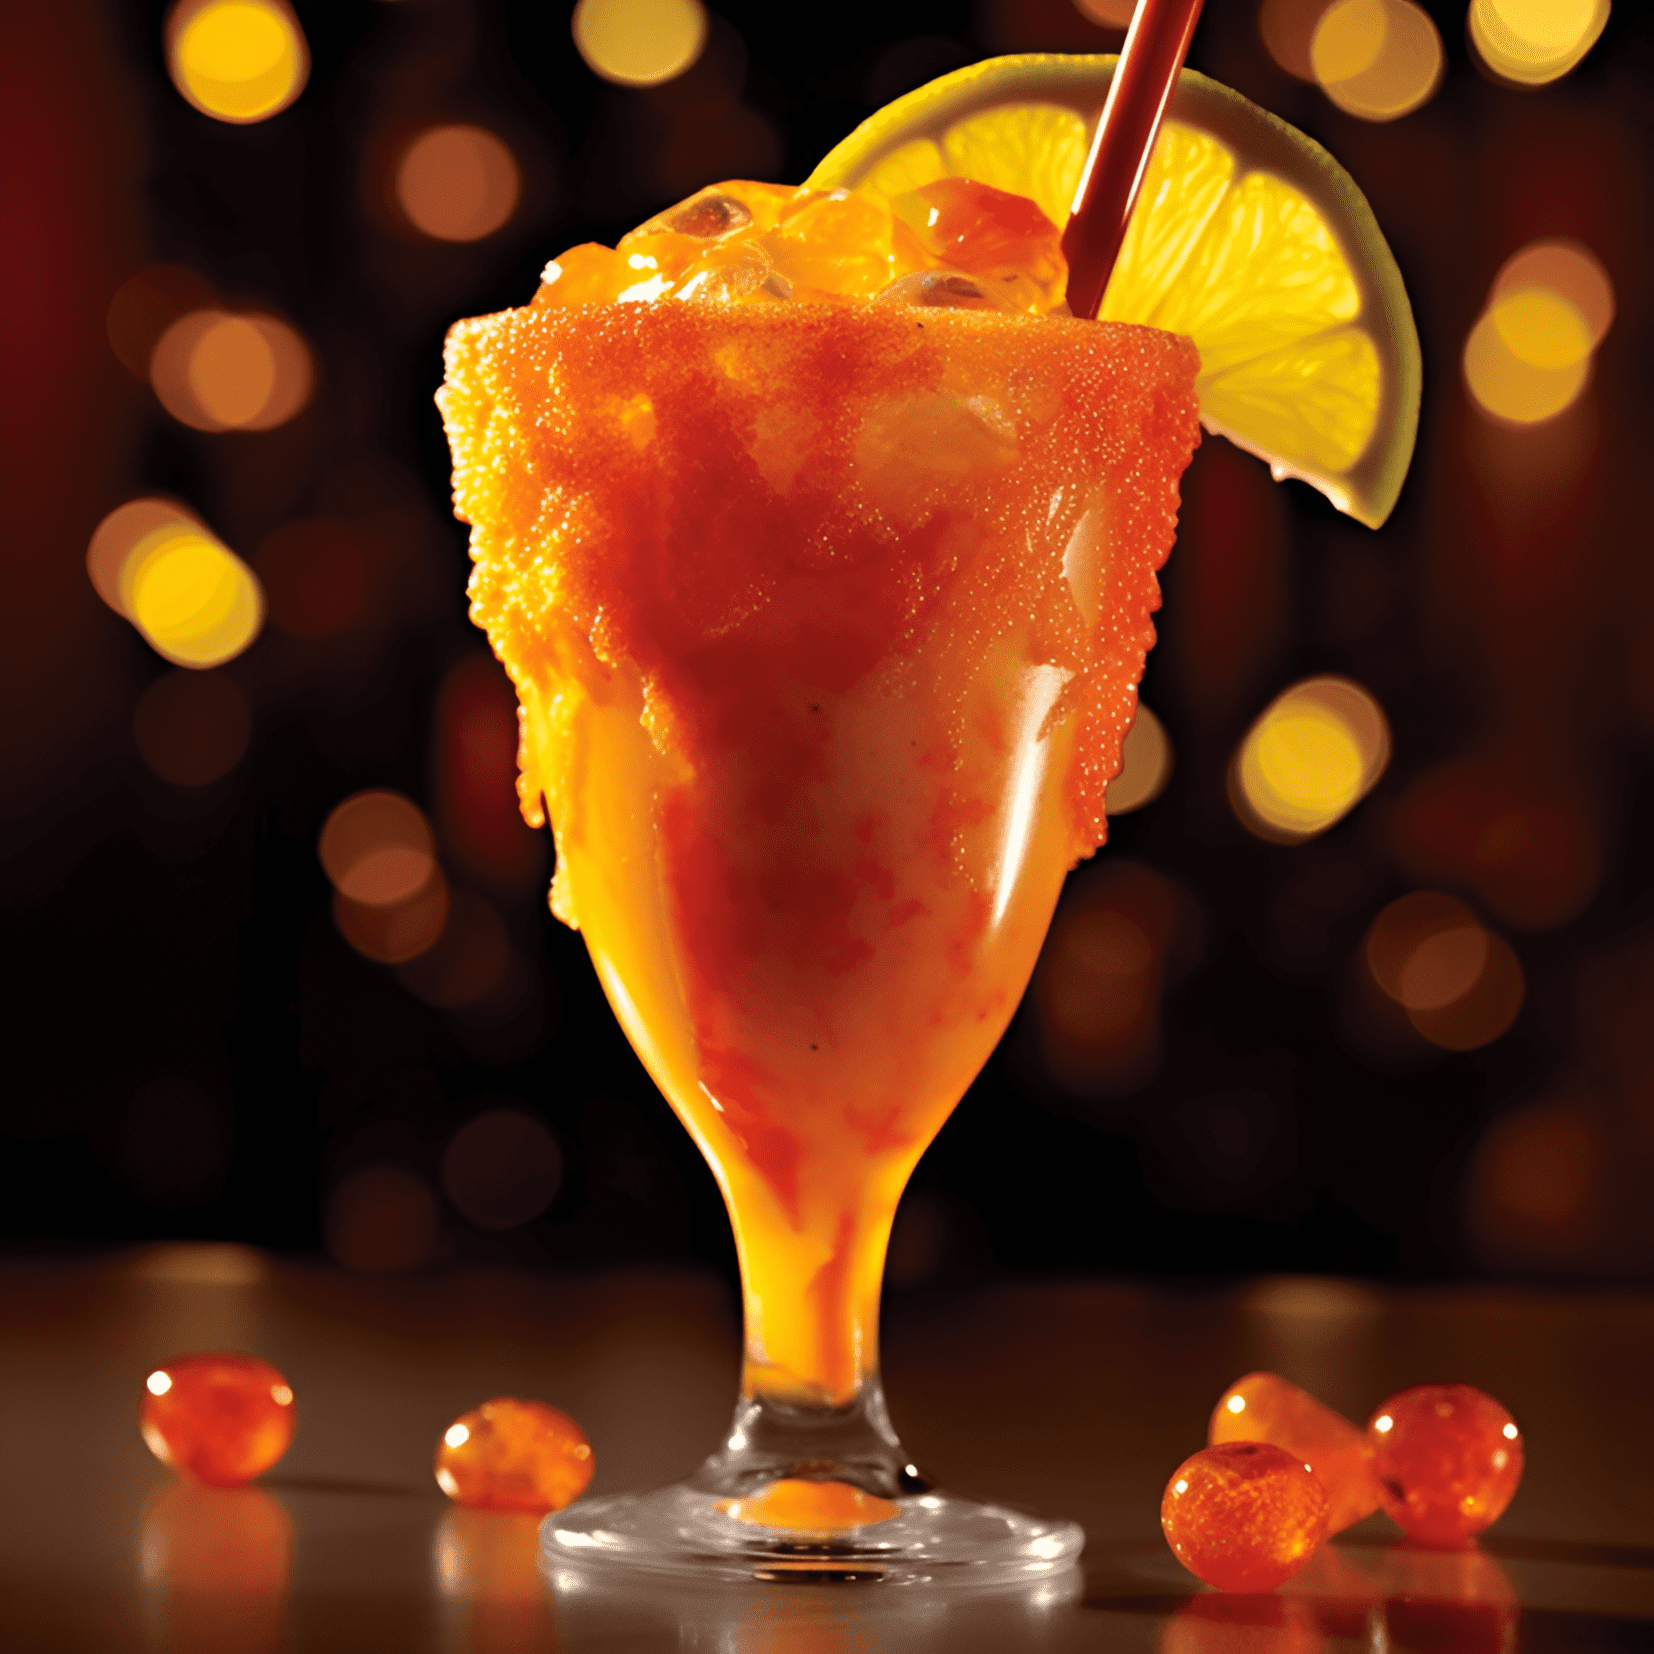 Kiss on the Lips Cocktail Recipe - The Kiss on the Lips cocktail is sweet, fruity, and refreshing with a hint of tartness. The combination of peach schnapps, mango puree, and grenadine creates a well-balanced and delightful flavor profile.